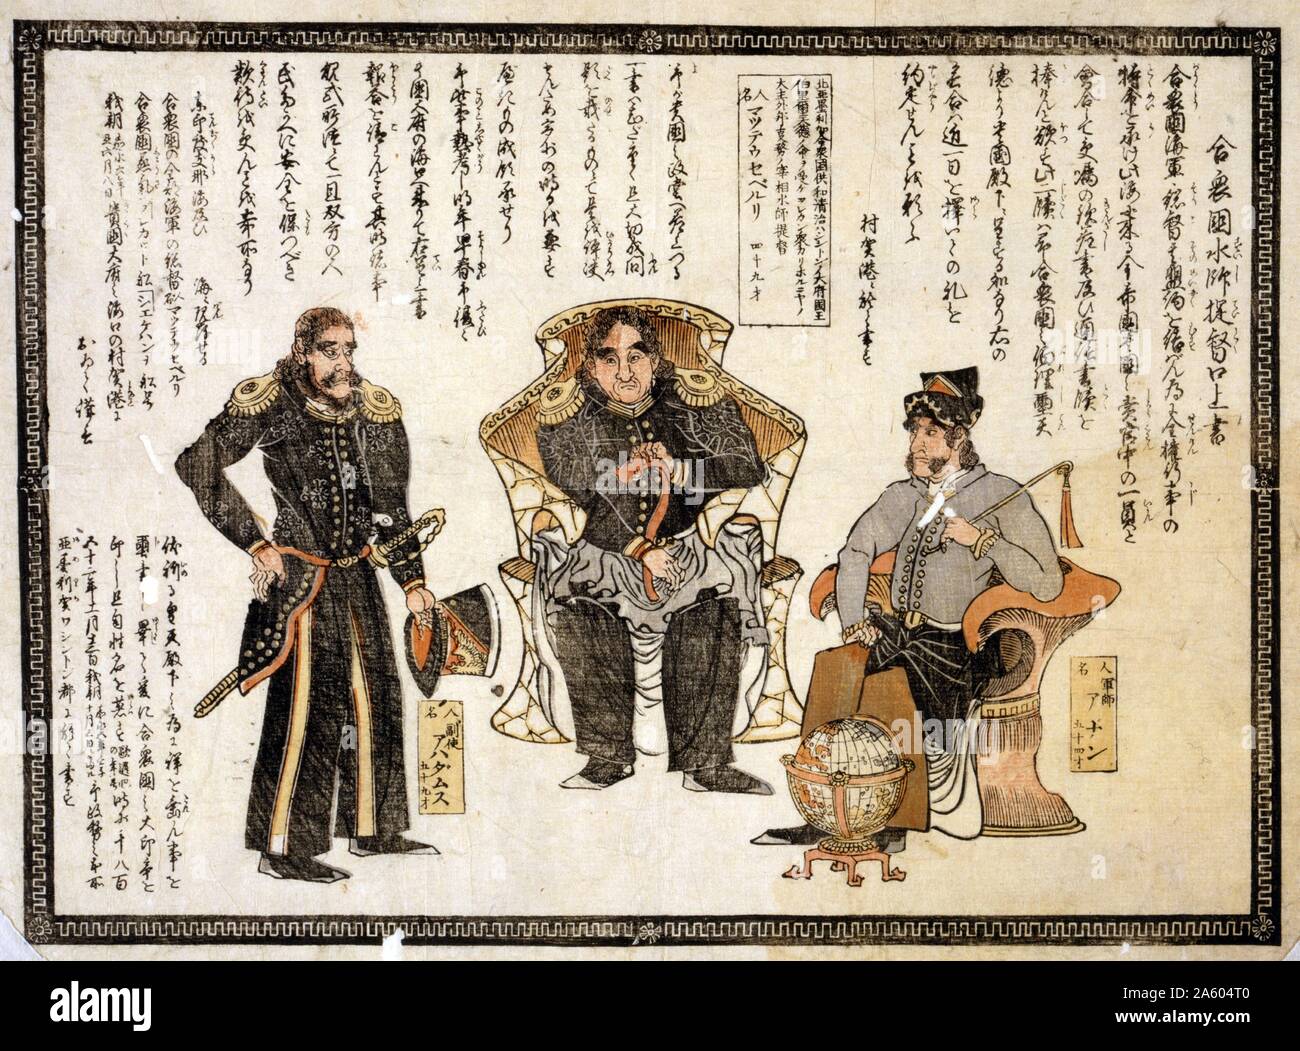 Gasshukoku suishi teitoku kojogaki (Oral statement by the American Navy admiral). circa 1870. Japanese print shows three men, two seated and one standing, possibly Commander Anan, age 54;Perry, age 49;Captain Henry Adams, age 59. Stock Photo